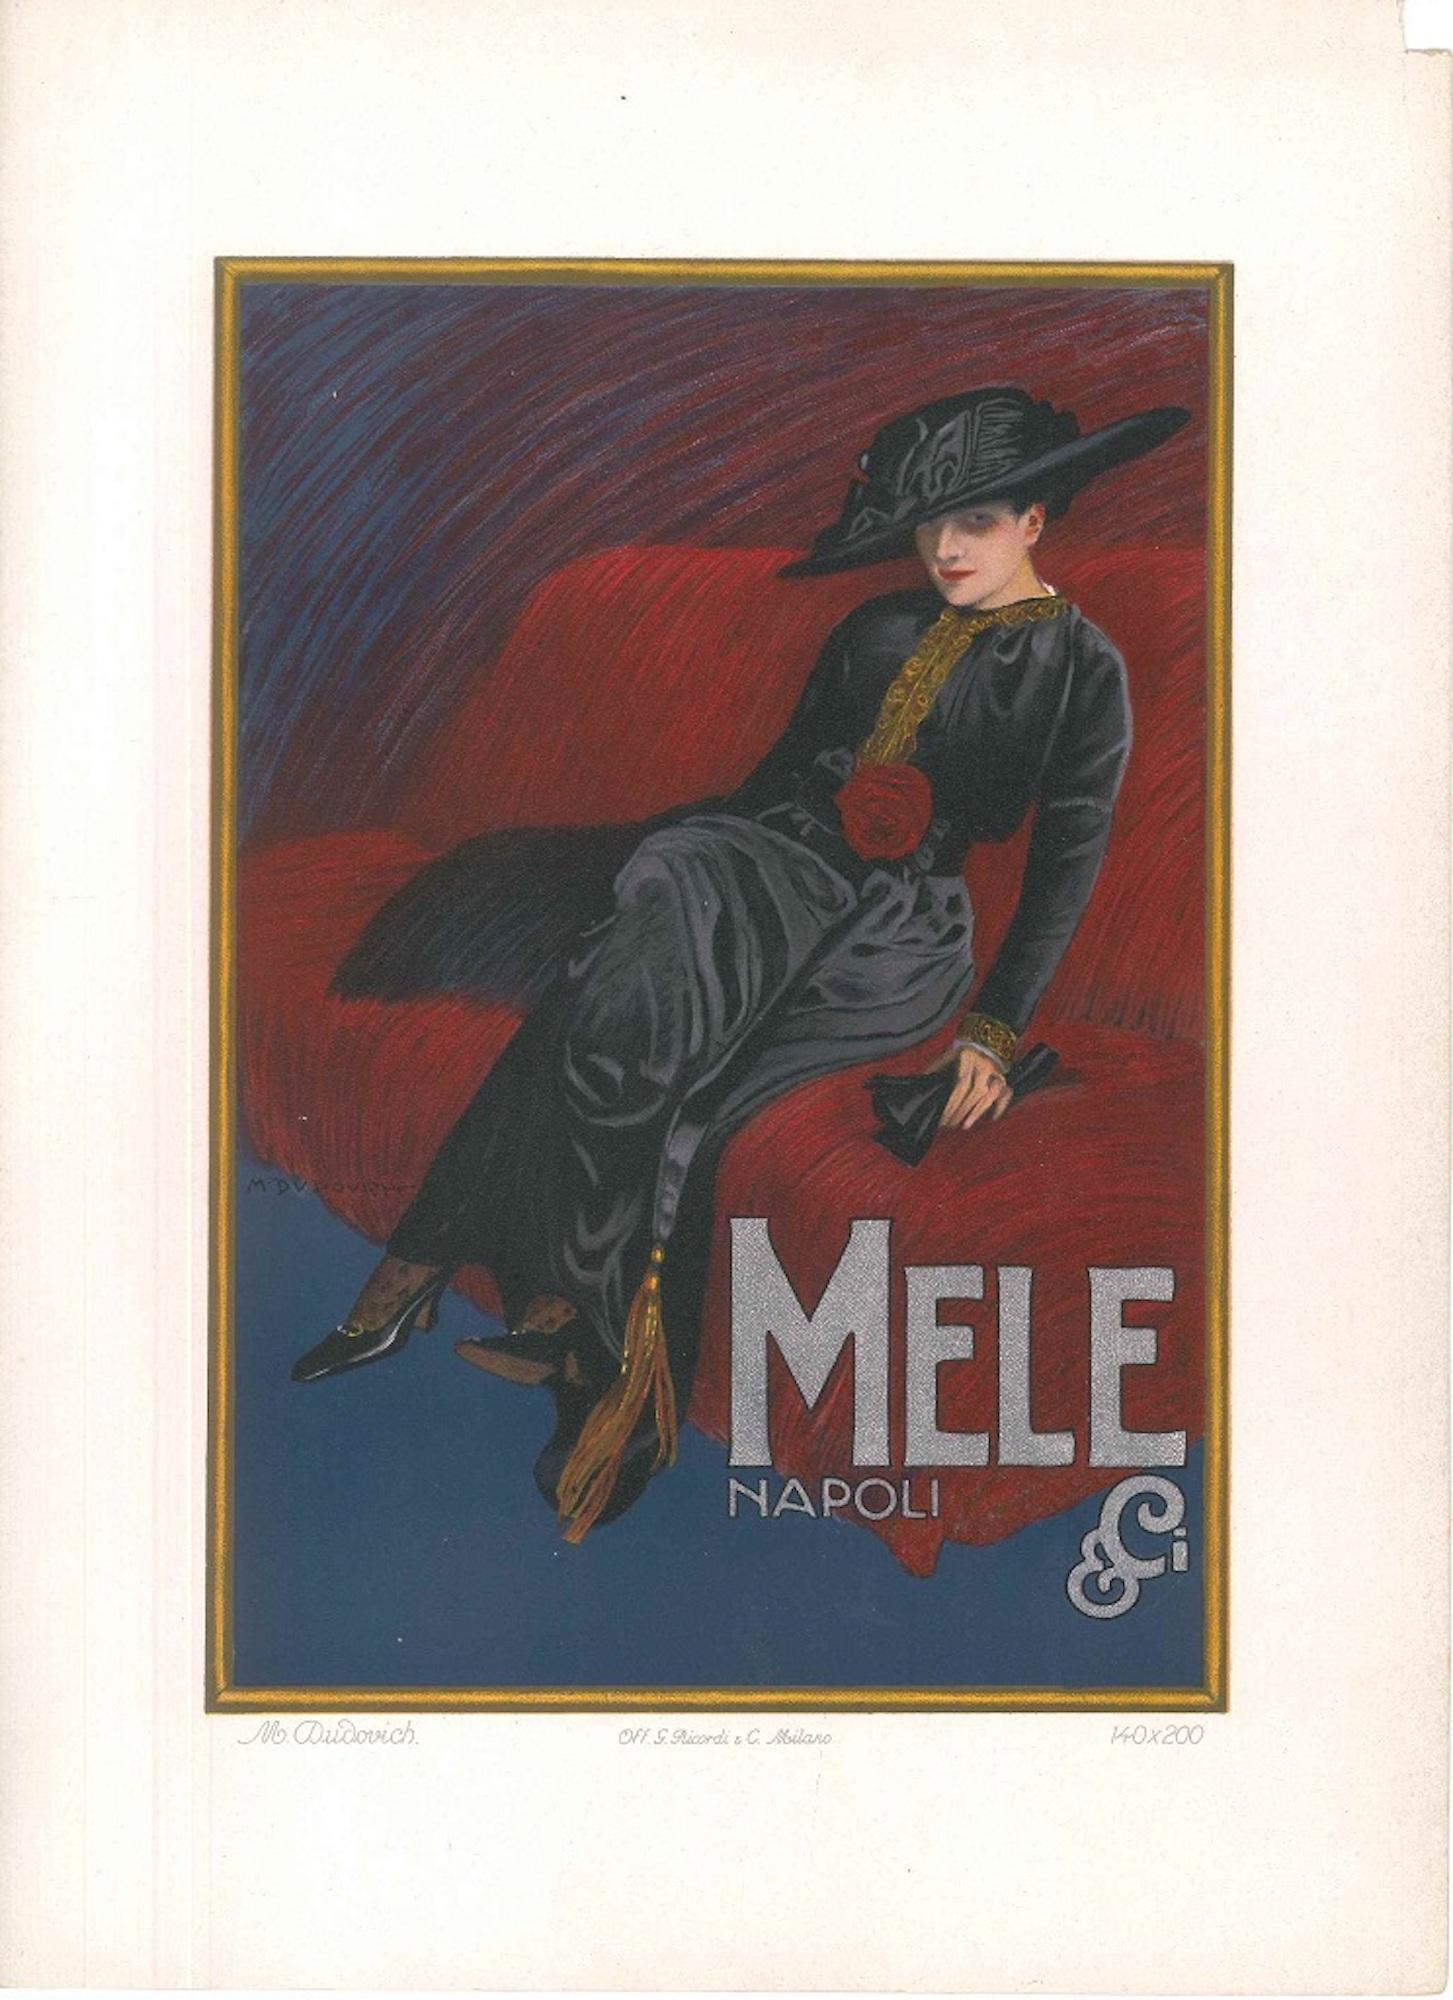 Image dimensions. 26x18 cm.

Mele 4 is a rare color lithograph printed by G. Ricordi and C. Milano, Milan between 1895 and 1914.

An advertising poster of the famous Neapolitan tailoring society "Mele", in very good conditions, except for a lightly